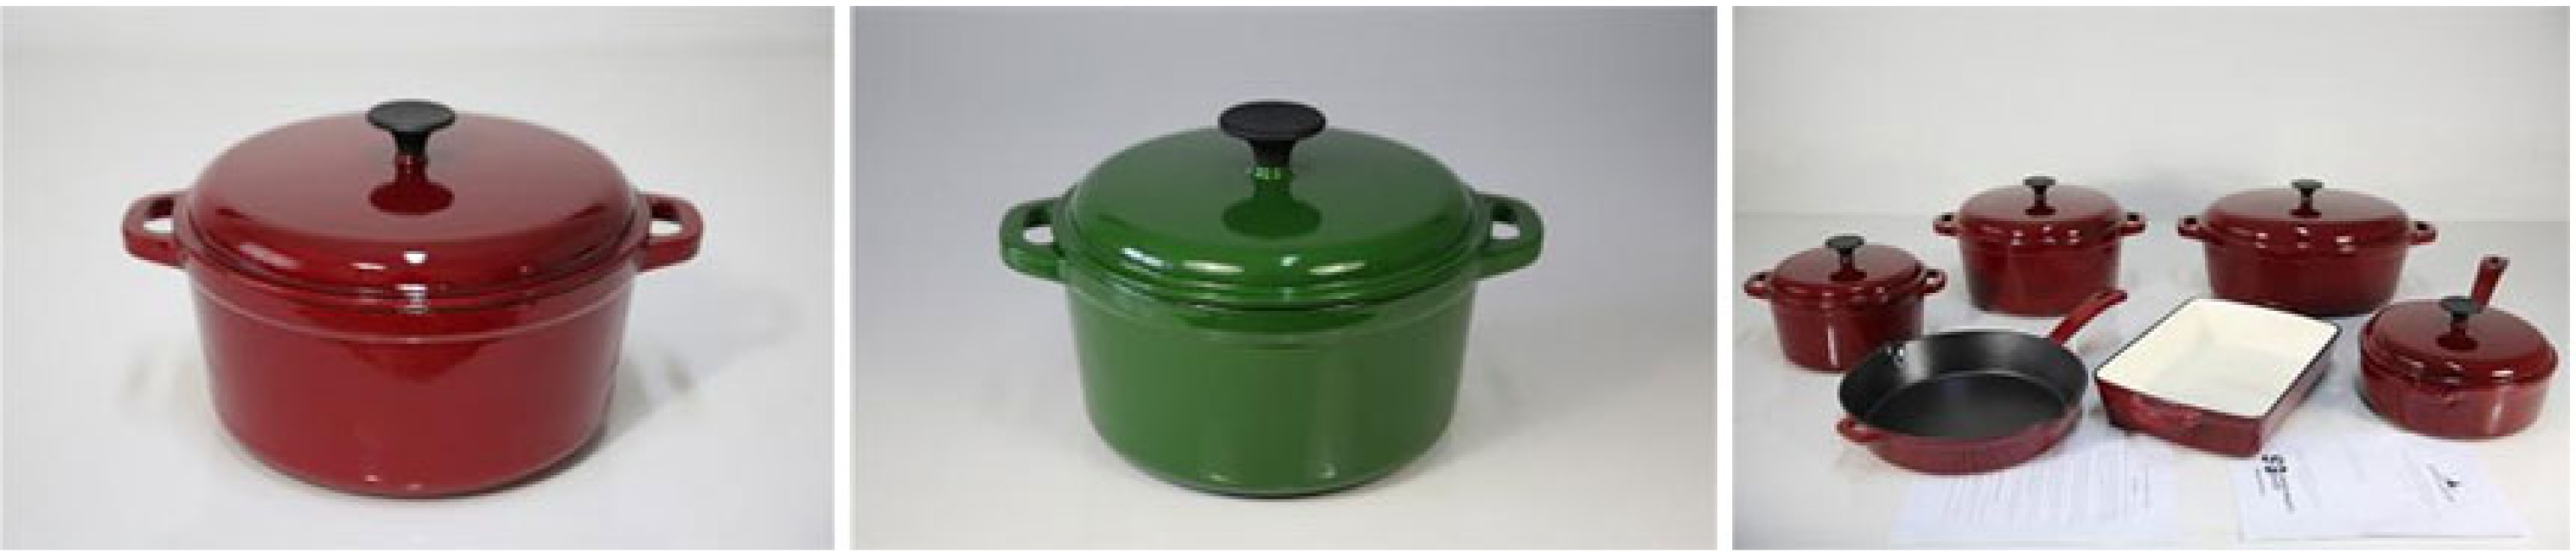 Casserole Cookware: Cast Iron Cooking Pot for Home and Kitchen